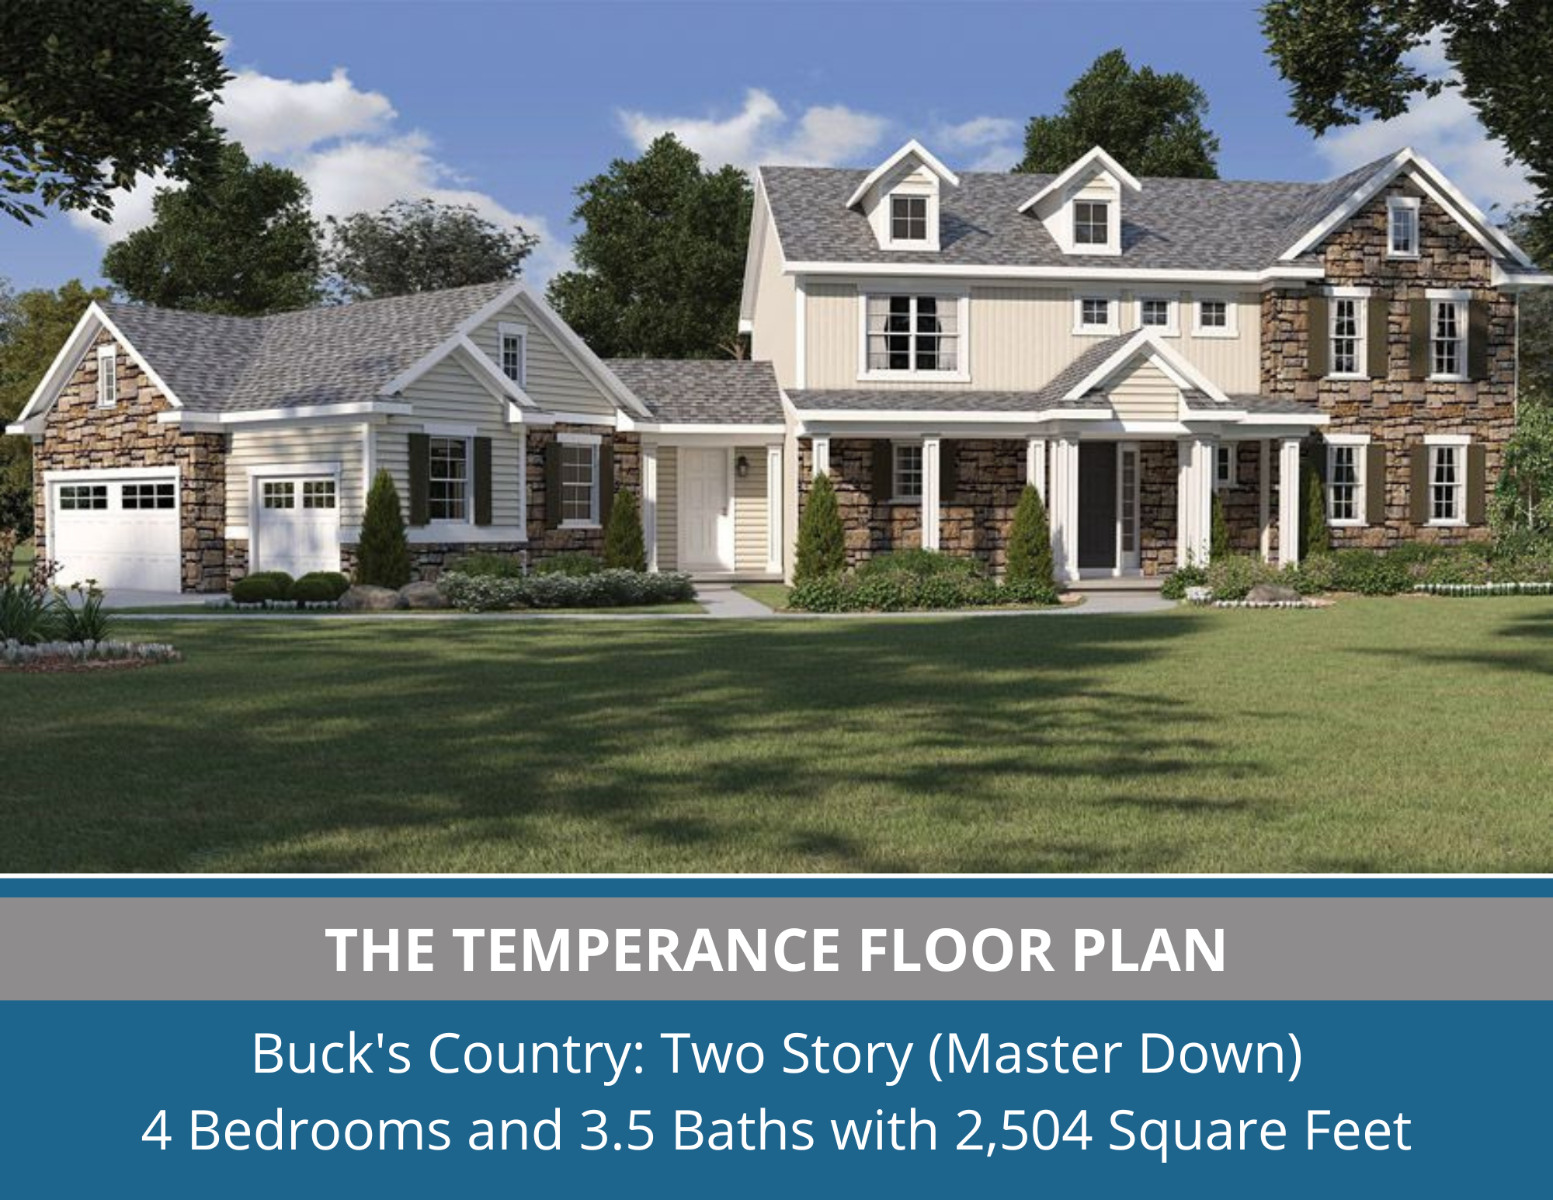 https://www.wausauhomes.com/temperance.html?&